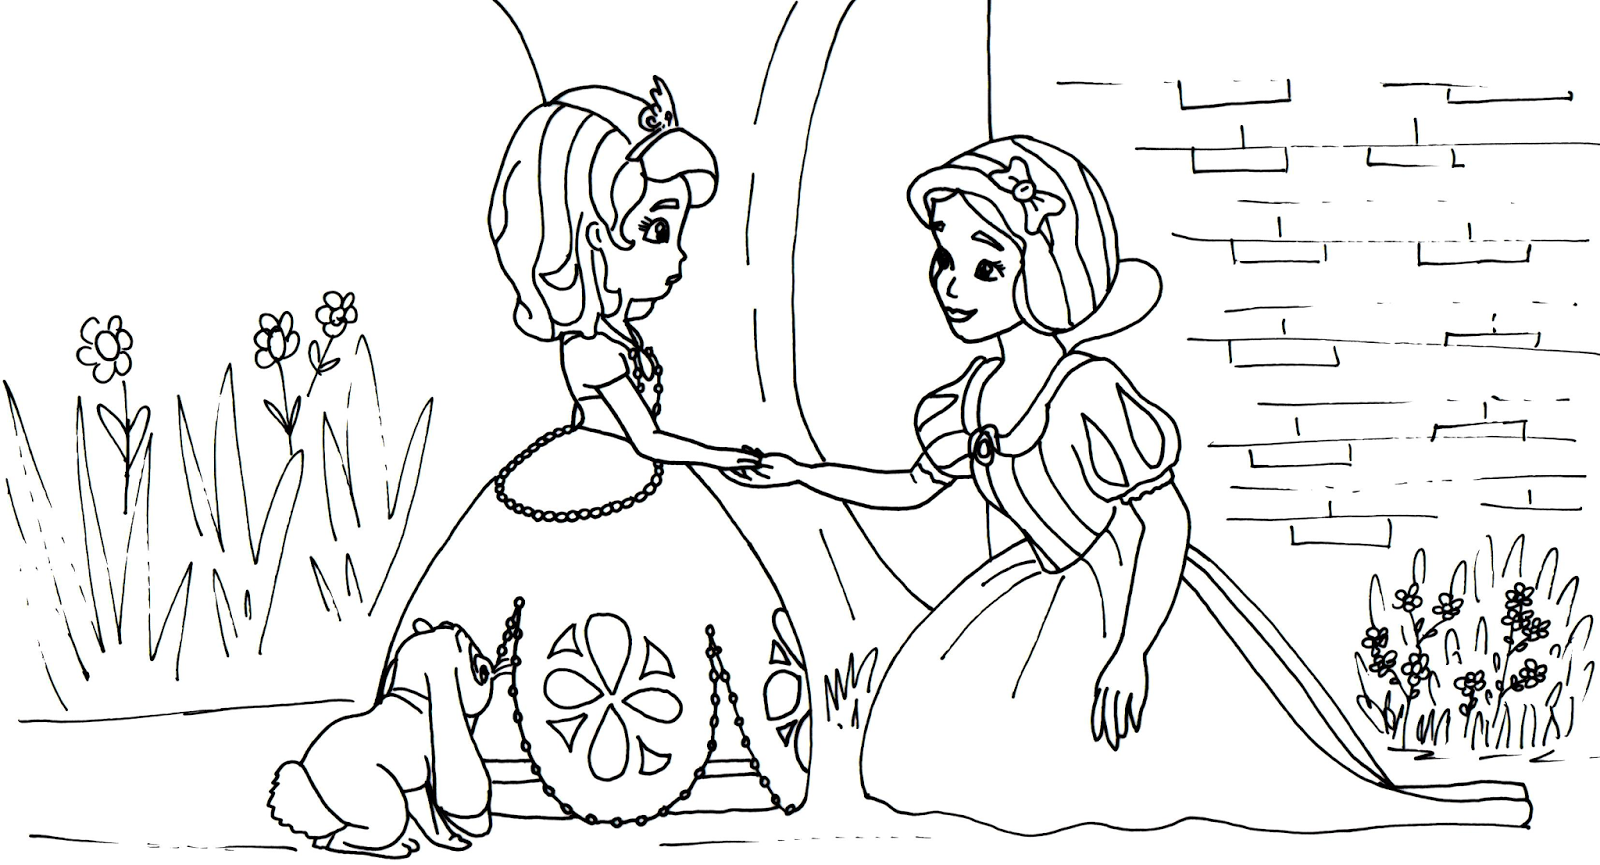 Sofia The First Coloring Pages: Snow White and Sofia the ...